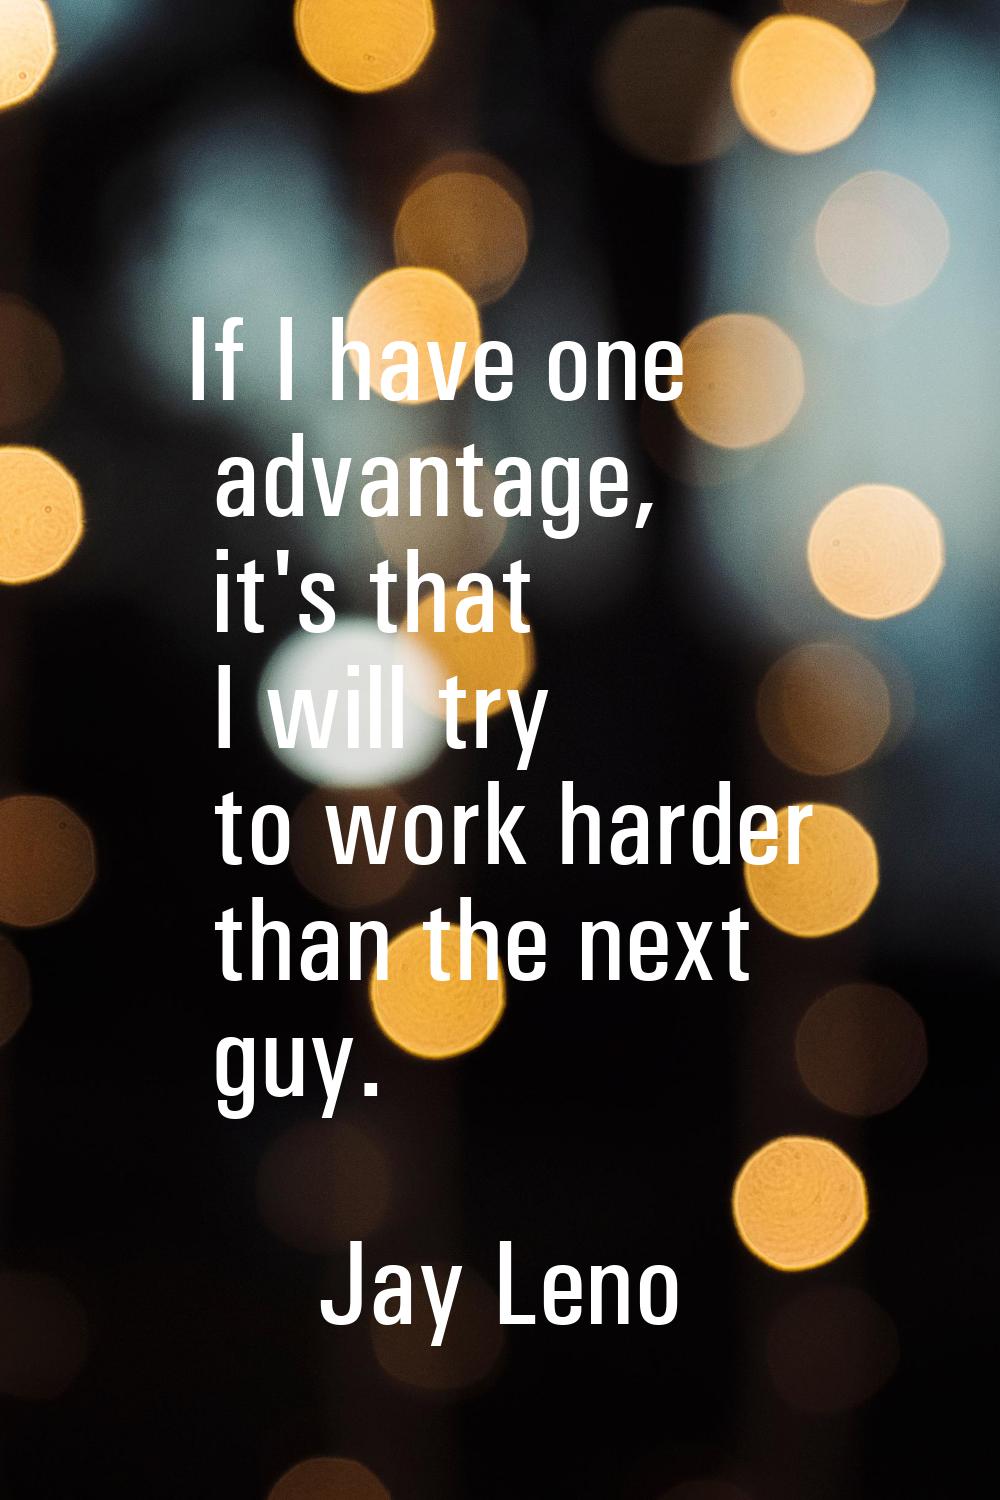 If I have one advantage, it's that I will try to work harder than the next guy.